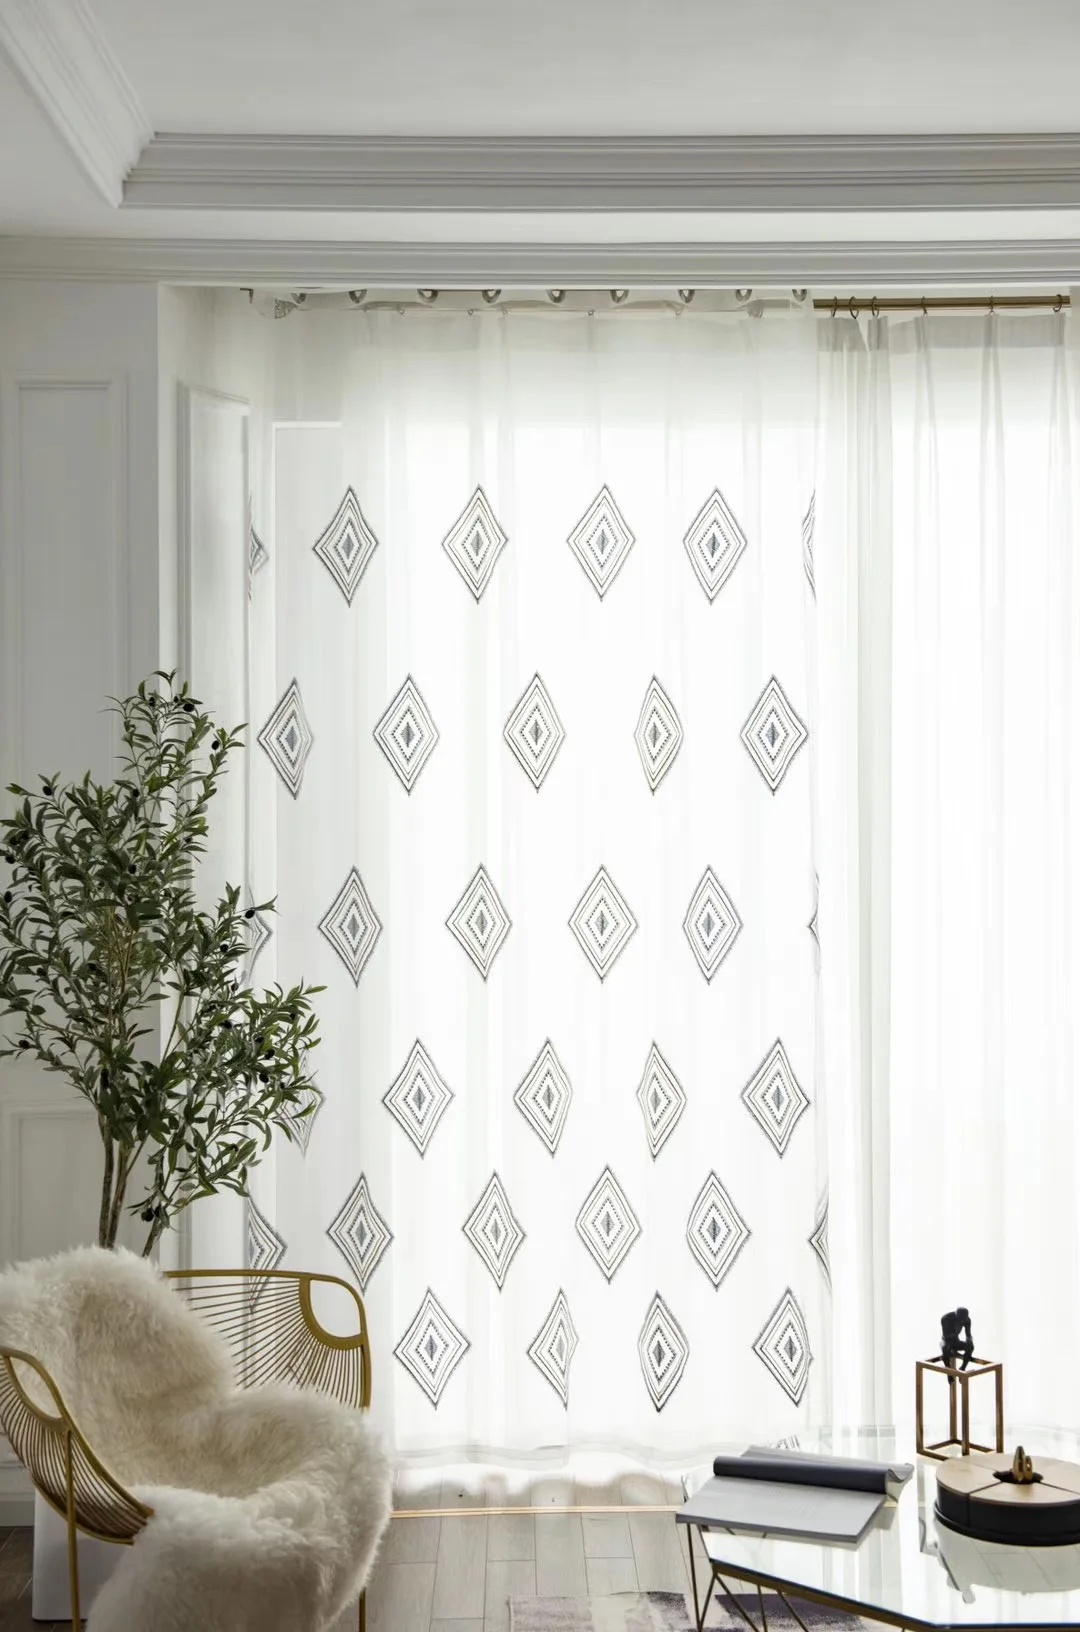 

Checkered Geometric Design White Sheer Curtains Tulle Window Curtains for Living Room Bedroom Tulle Voile Cafe Curtains